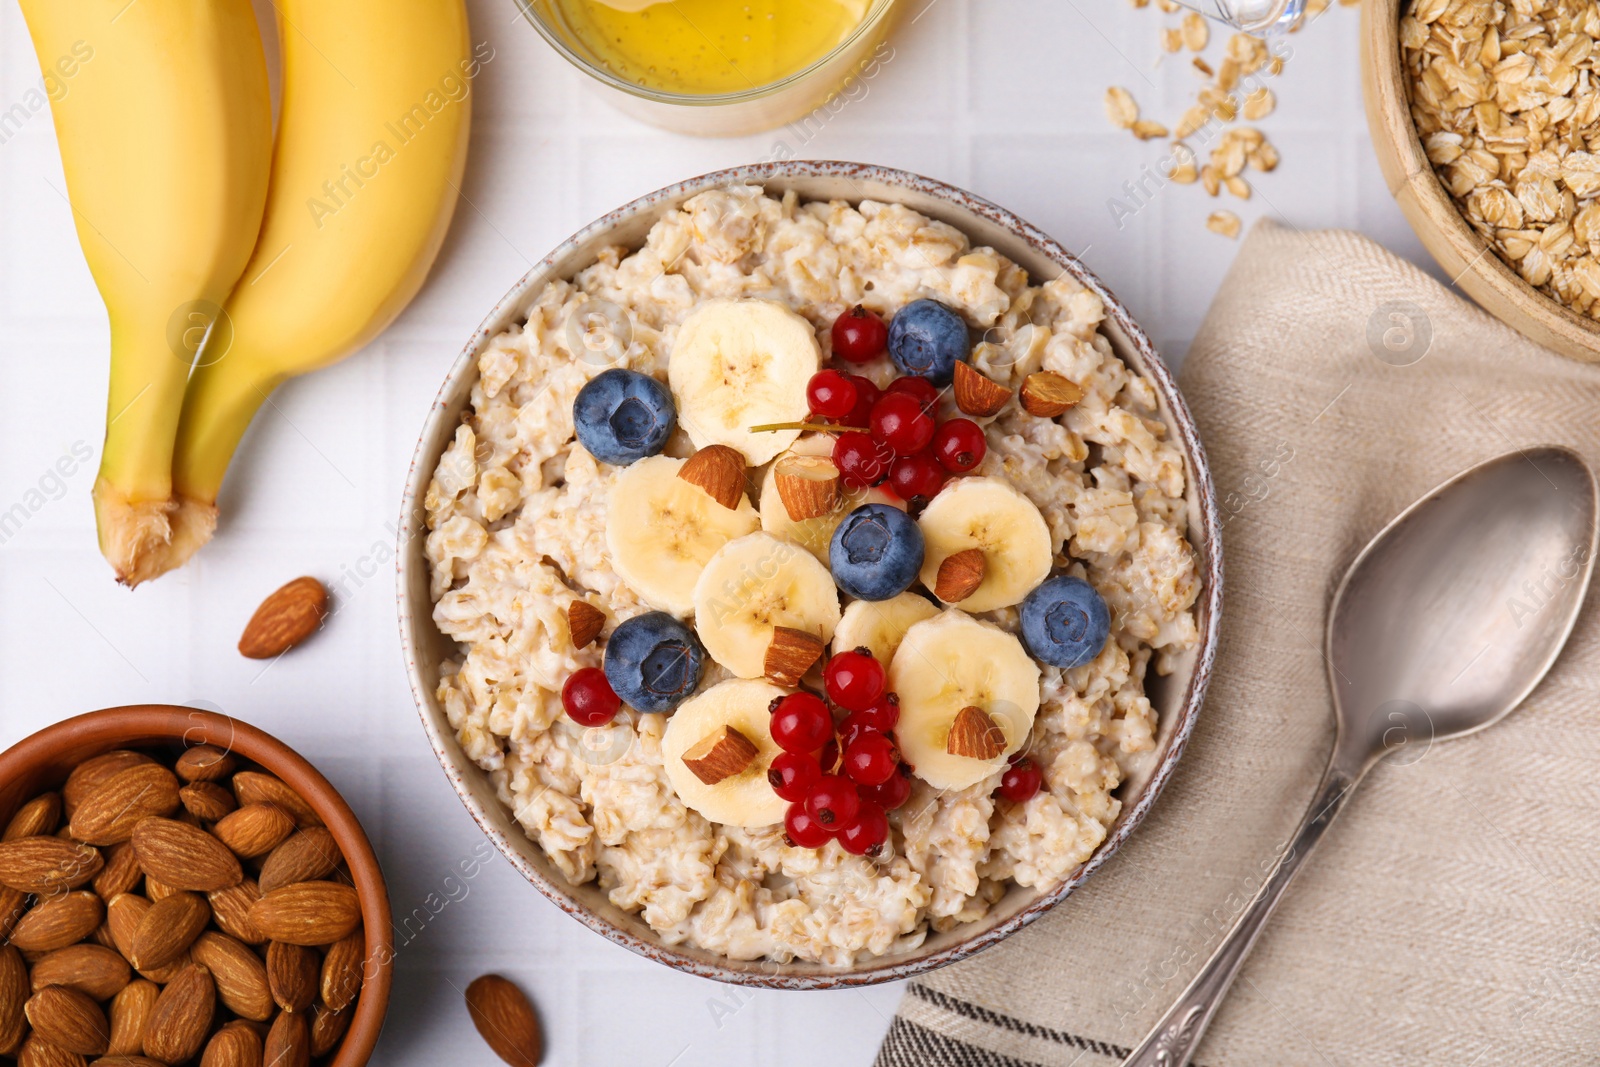 Photo of Oatmeal served with berries, almonds and banana slices on white tiled table, flat lay